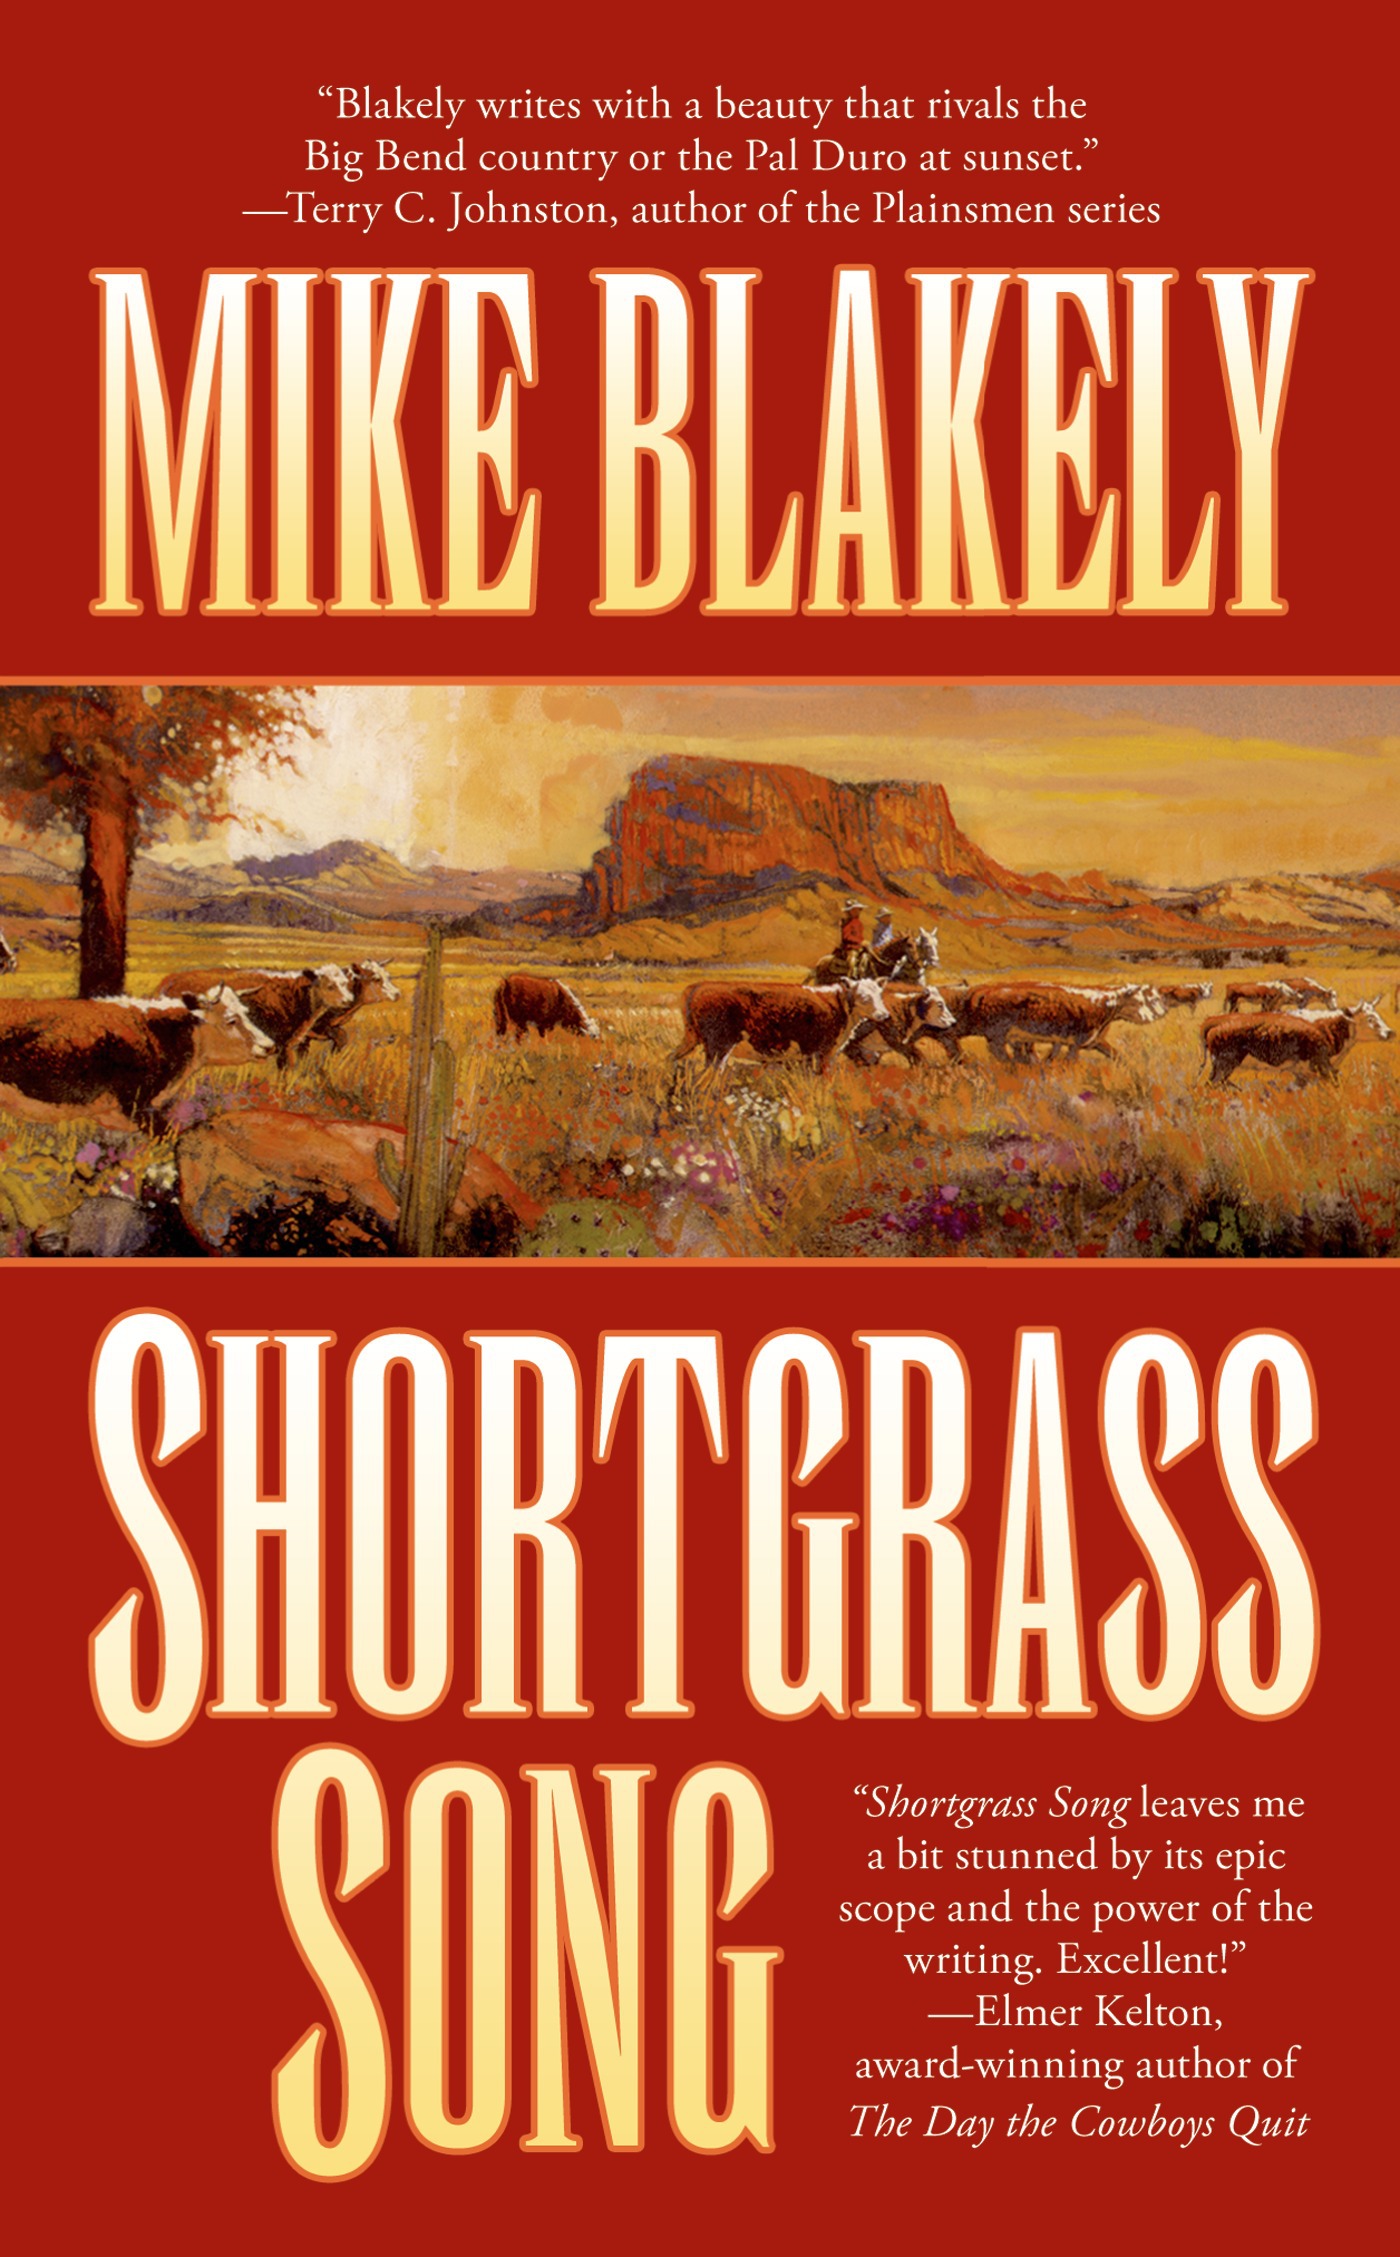 Shortgrass Song by Mike Blakely